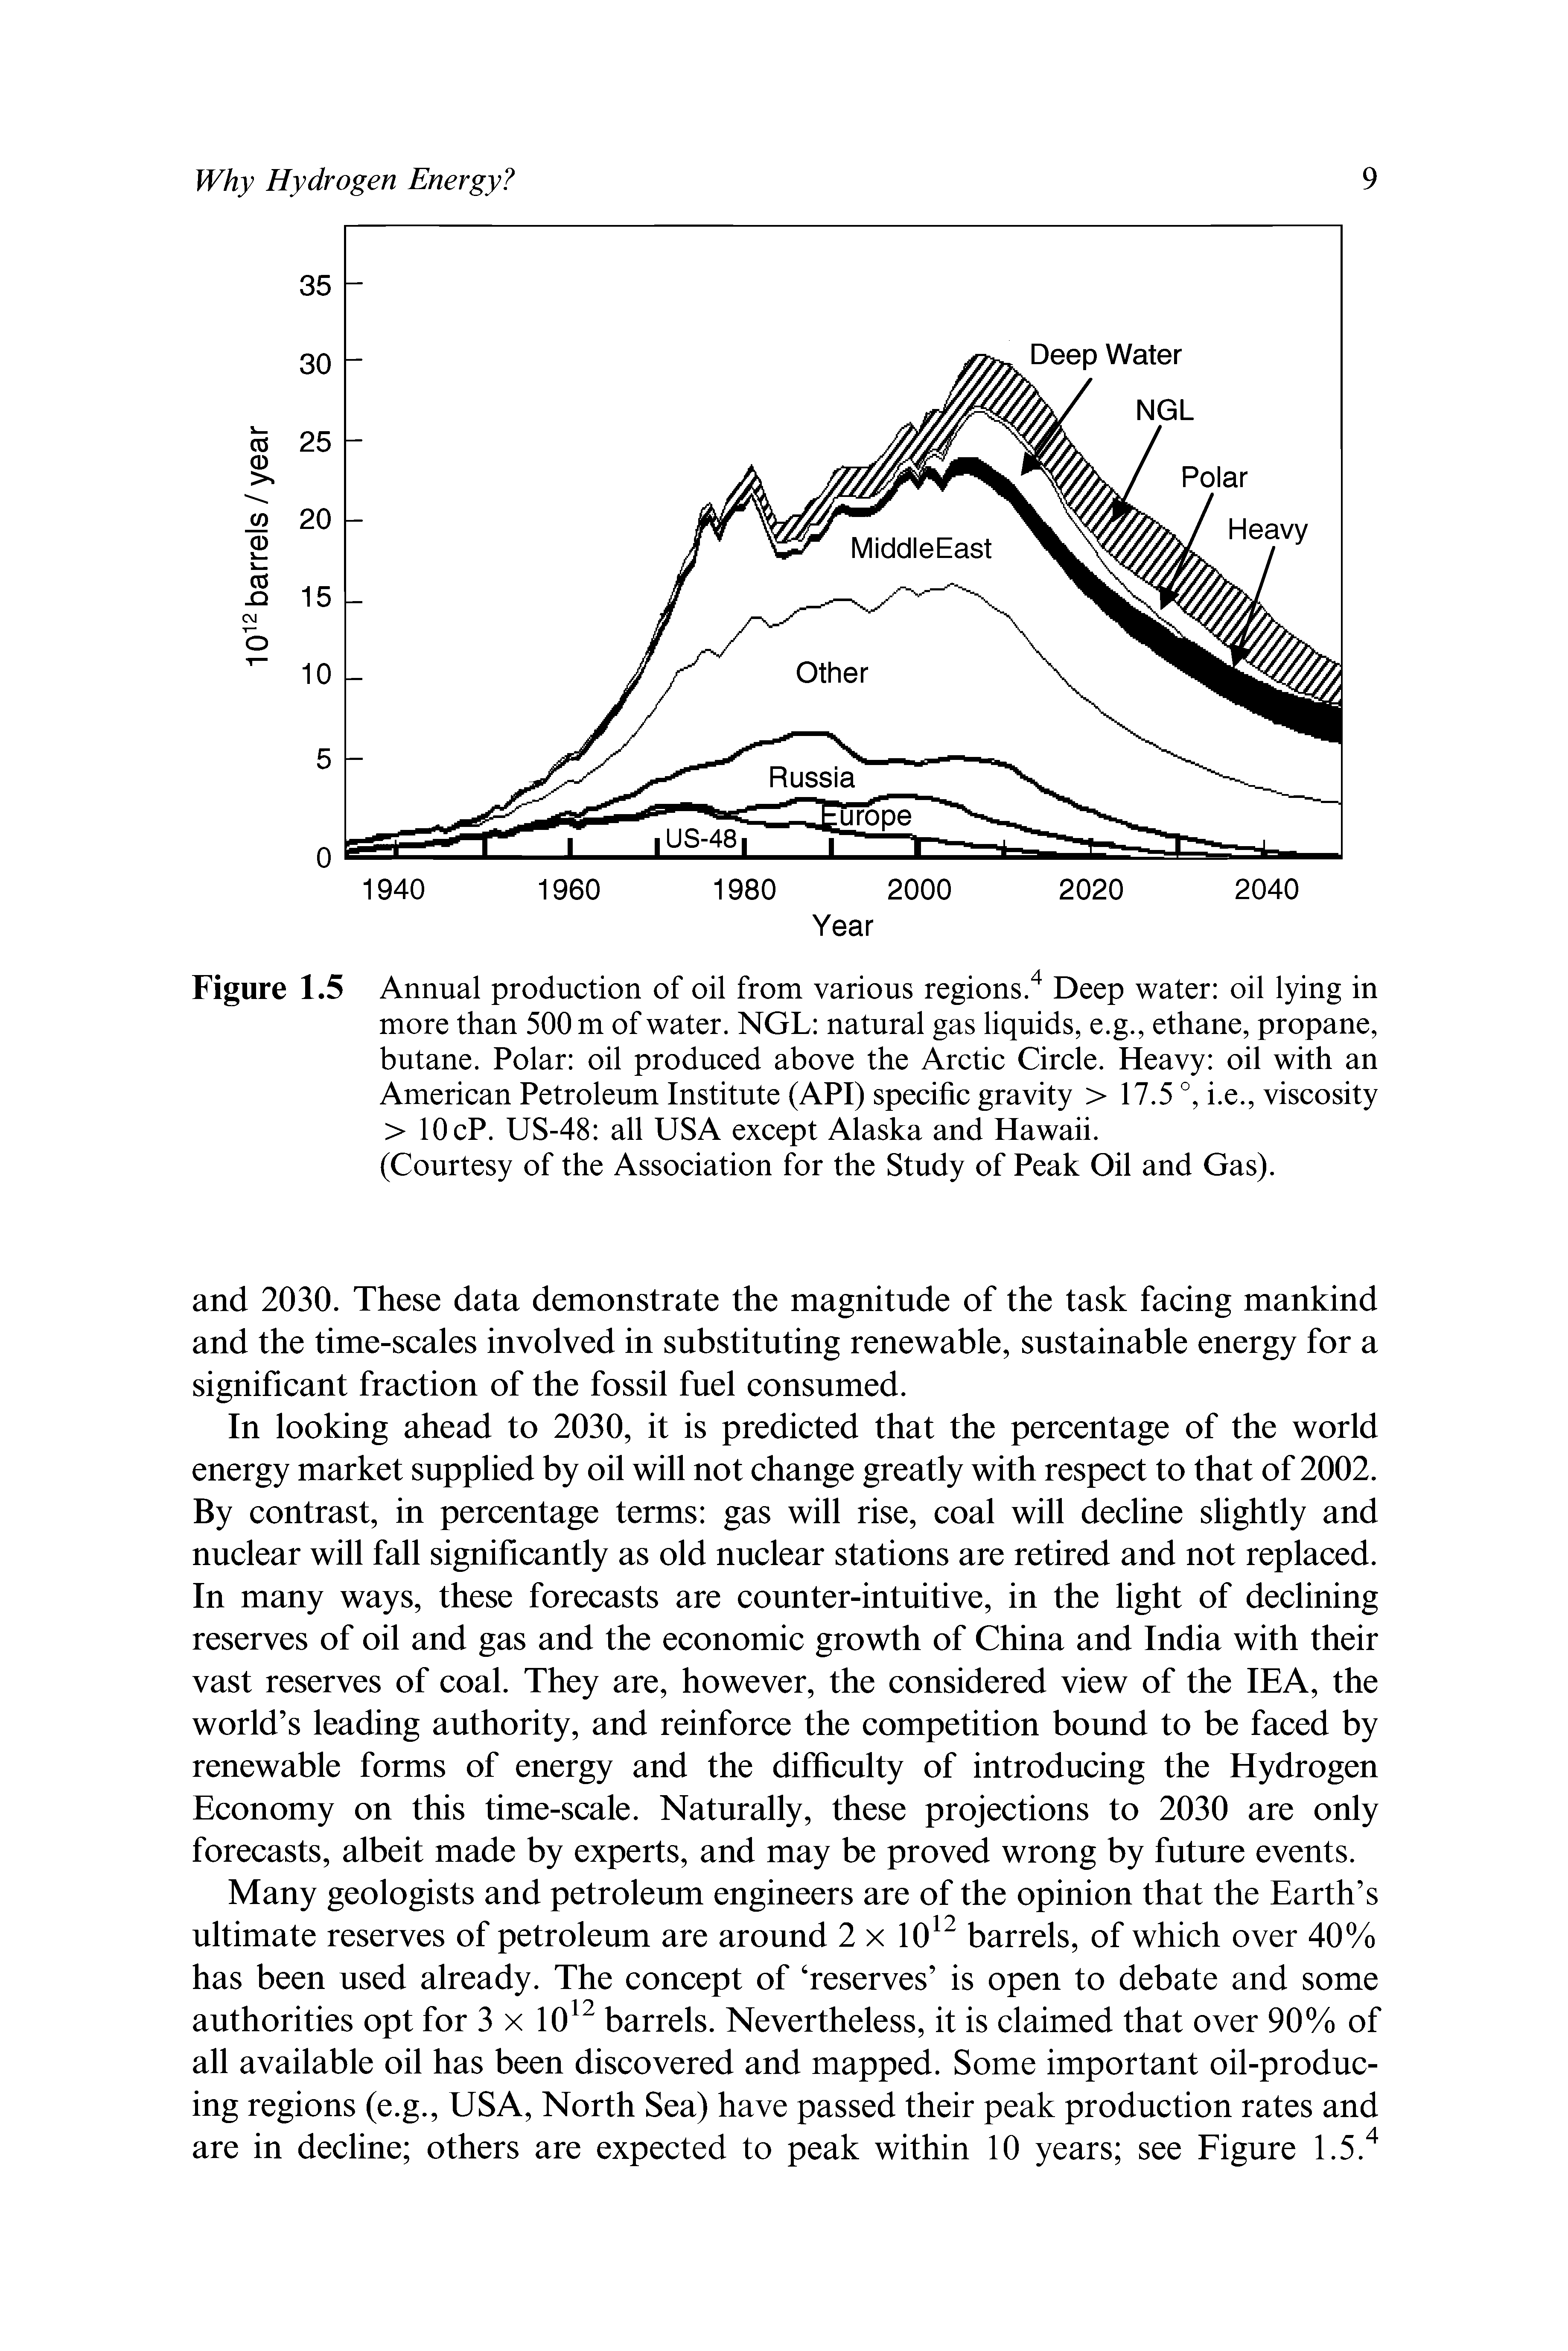 Figure 1.5 Annual production of oil from various regions." Deep water oil lying in more than 500 m of water. NGL natural gas liquids, e.g., ethane, propane, butane. Polar oil produced above the Arctic Circle. Heavy oil with an American Petroleum Institute (API) specific gravity > 17.5 °, i.e., viscosity > 10 cP. US-48 all USA except Alaska and Hawaii.